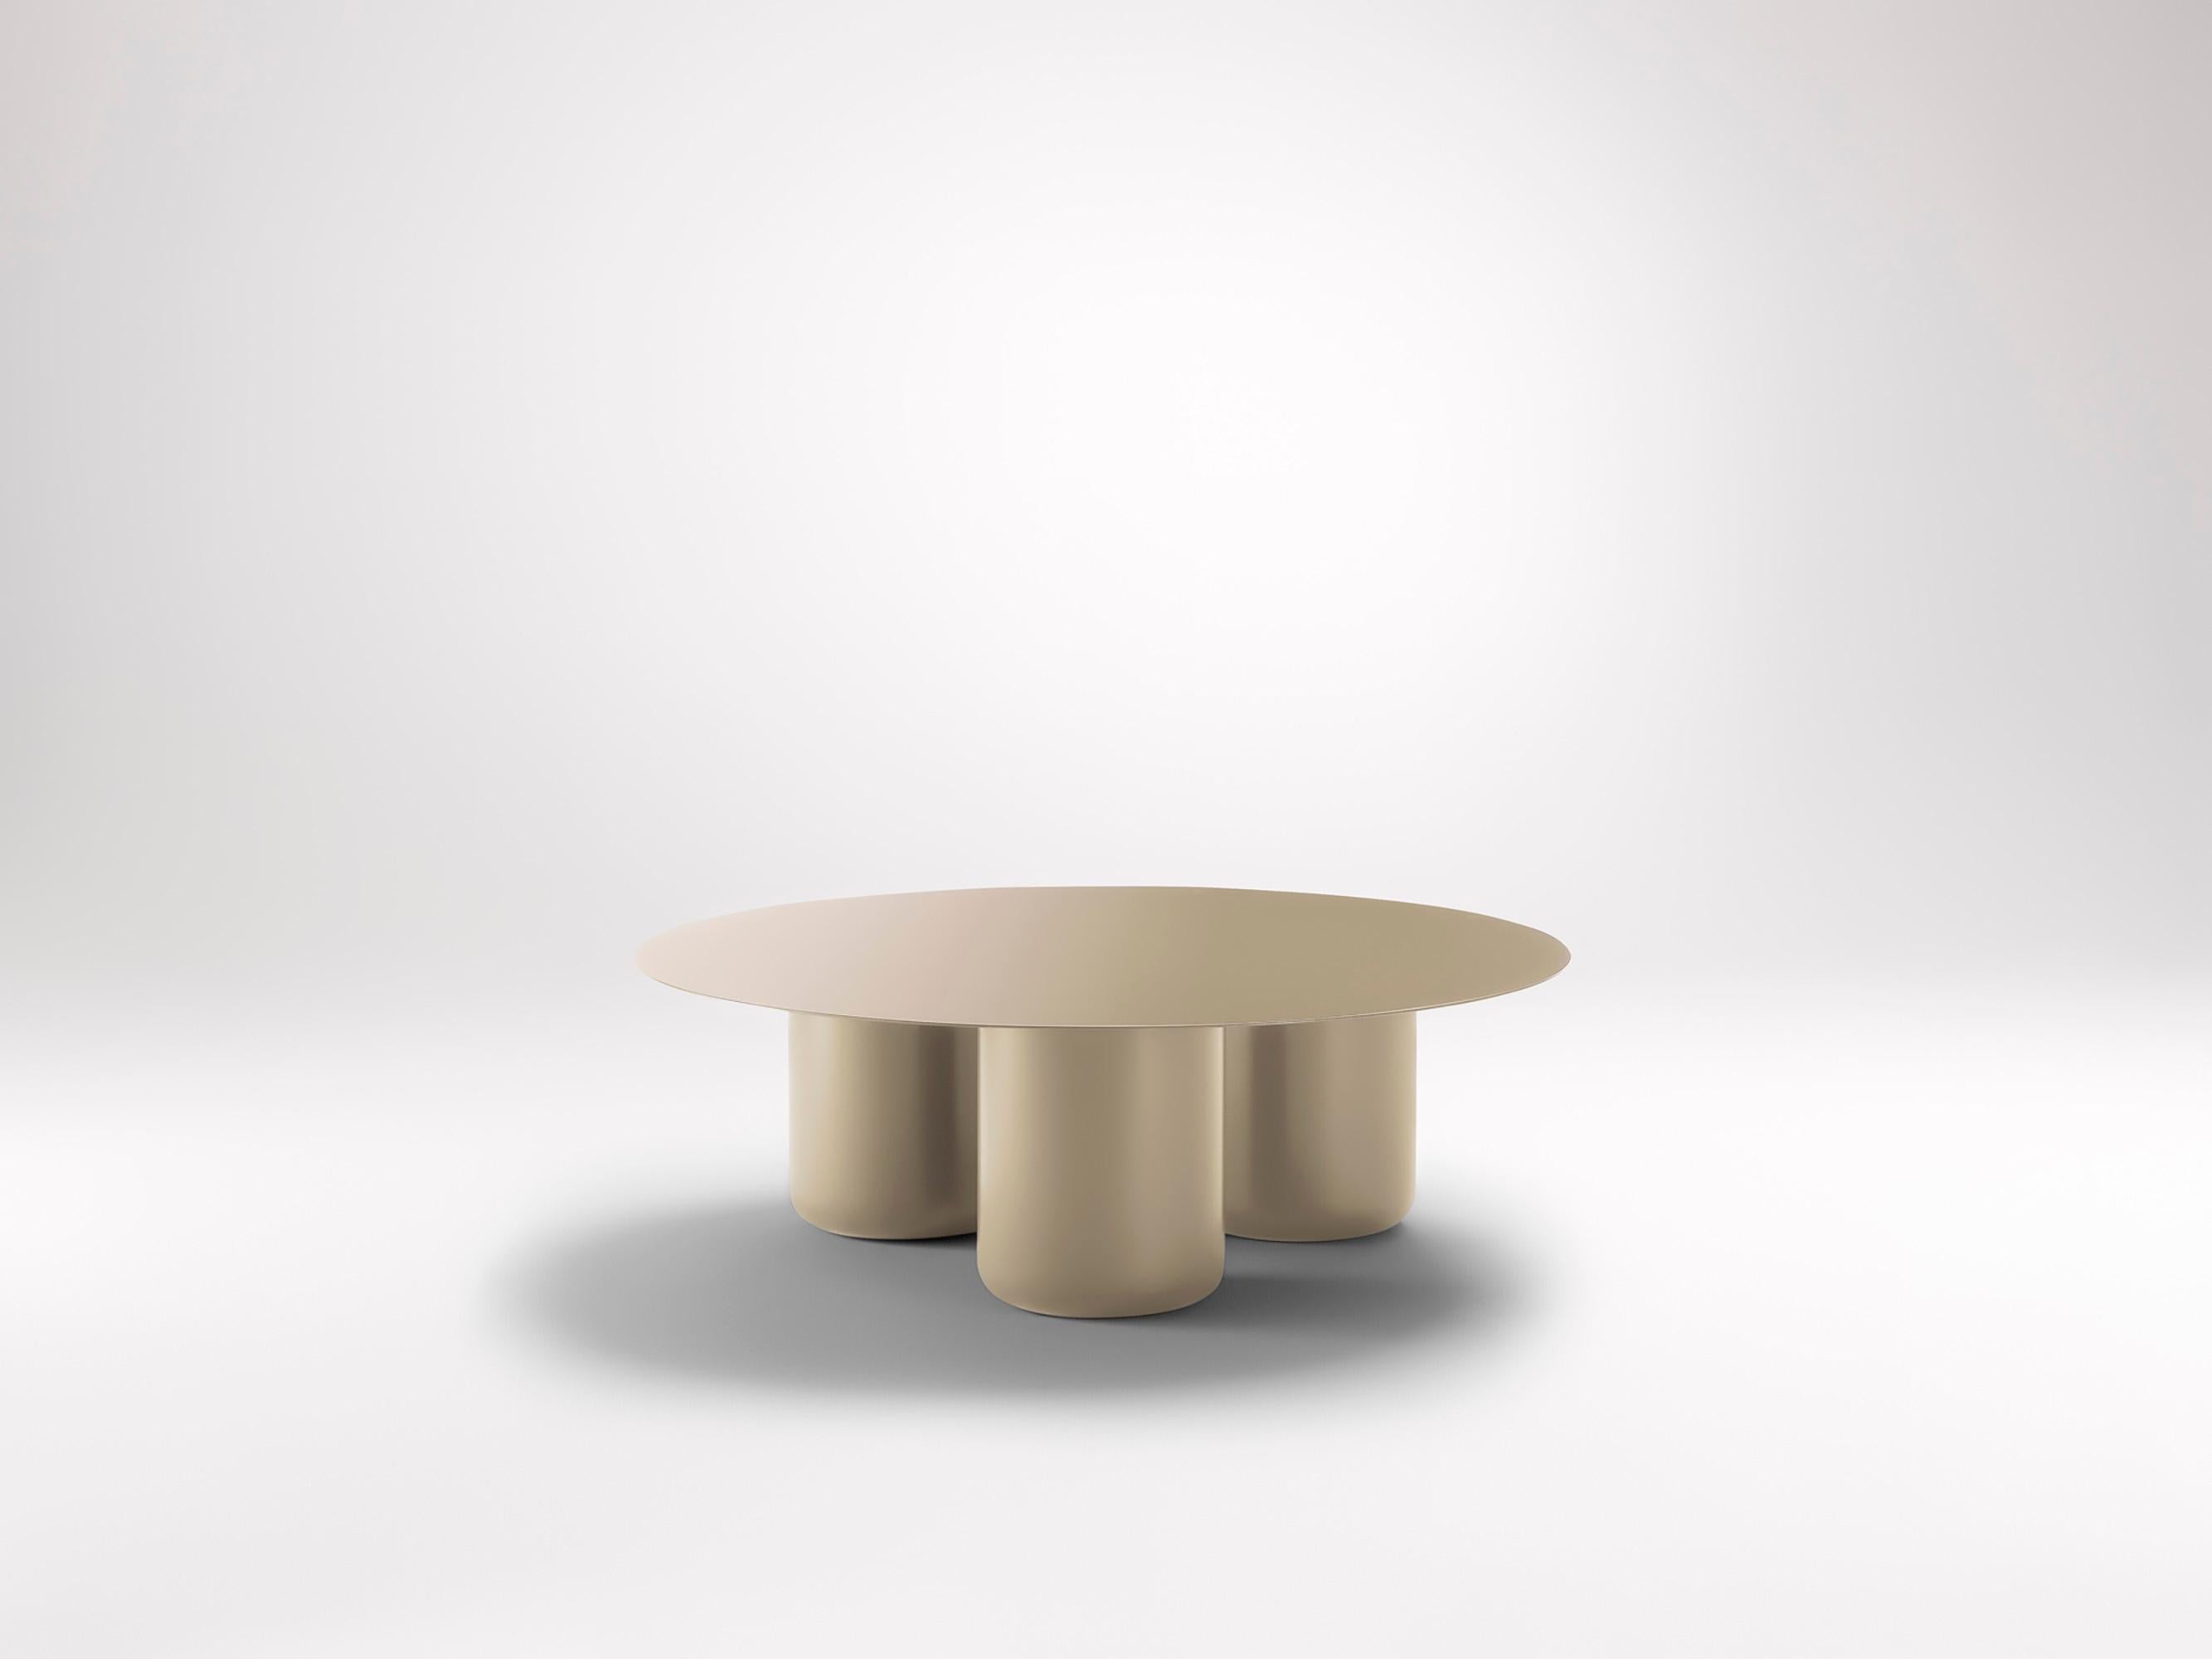 Paperbark Round Table by Coco Flip
Dimensions: D 100 x H 32 / 36 / 40 / 42 cm
Materials: Mild steel, powder-coated with zinc undercoat. 
Weight: 34 kg

Coco Flip is a Melbourne based furniture and lighting design studio, run by us, Kate Stokes and